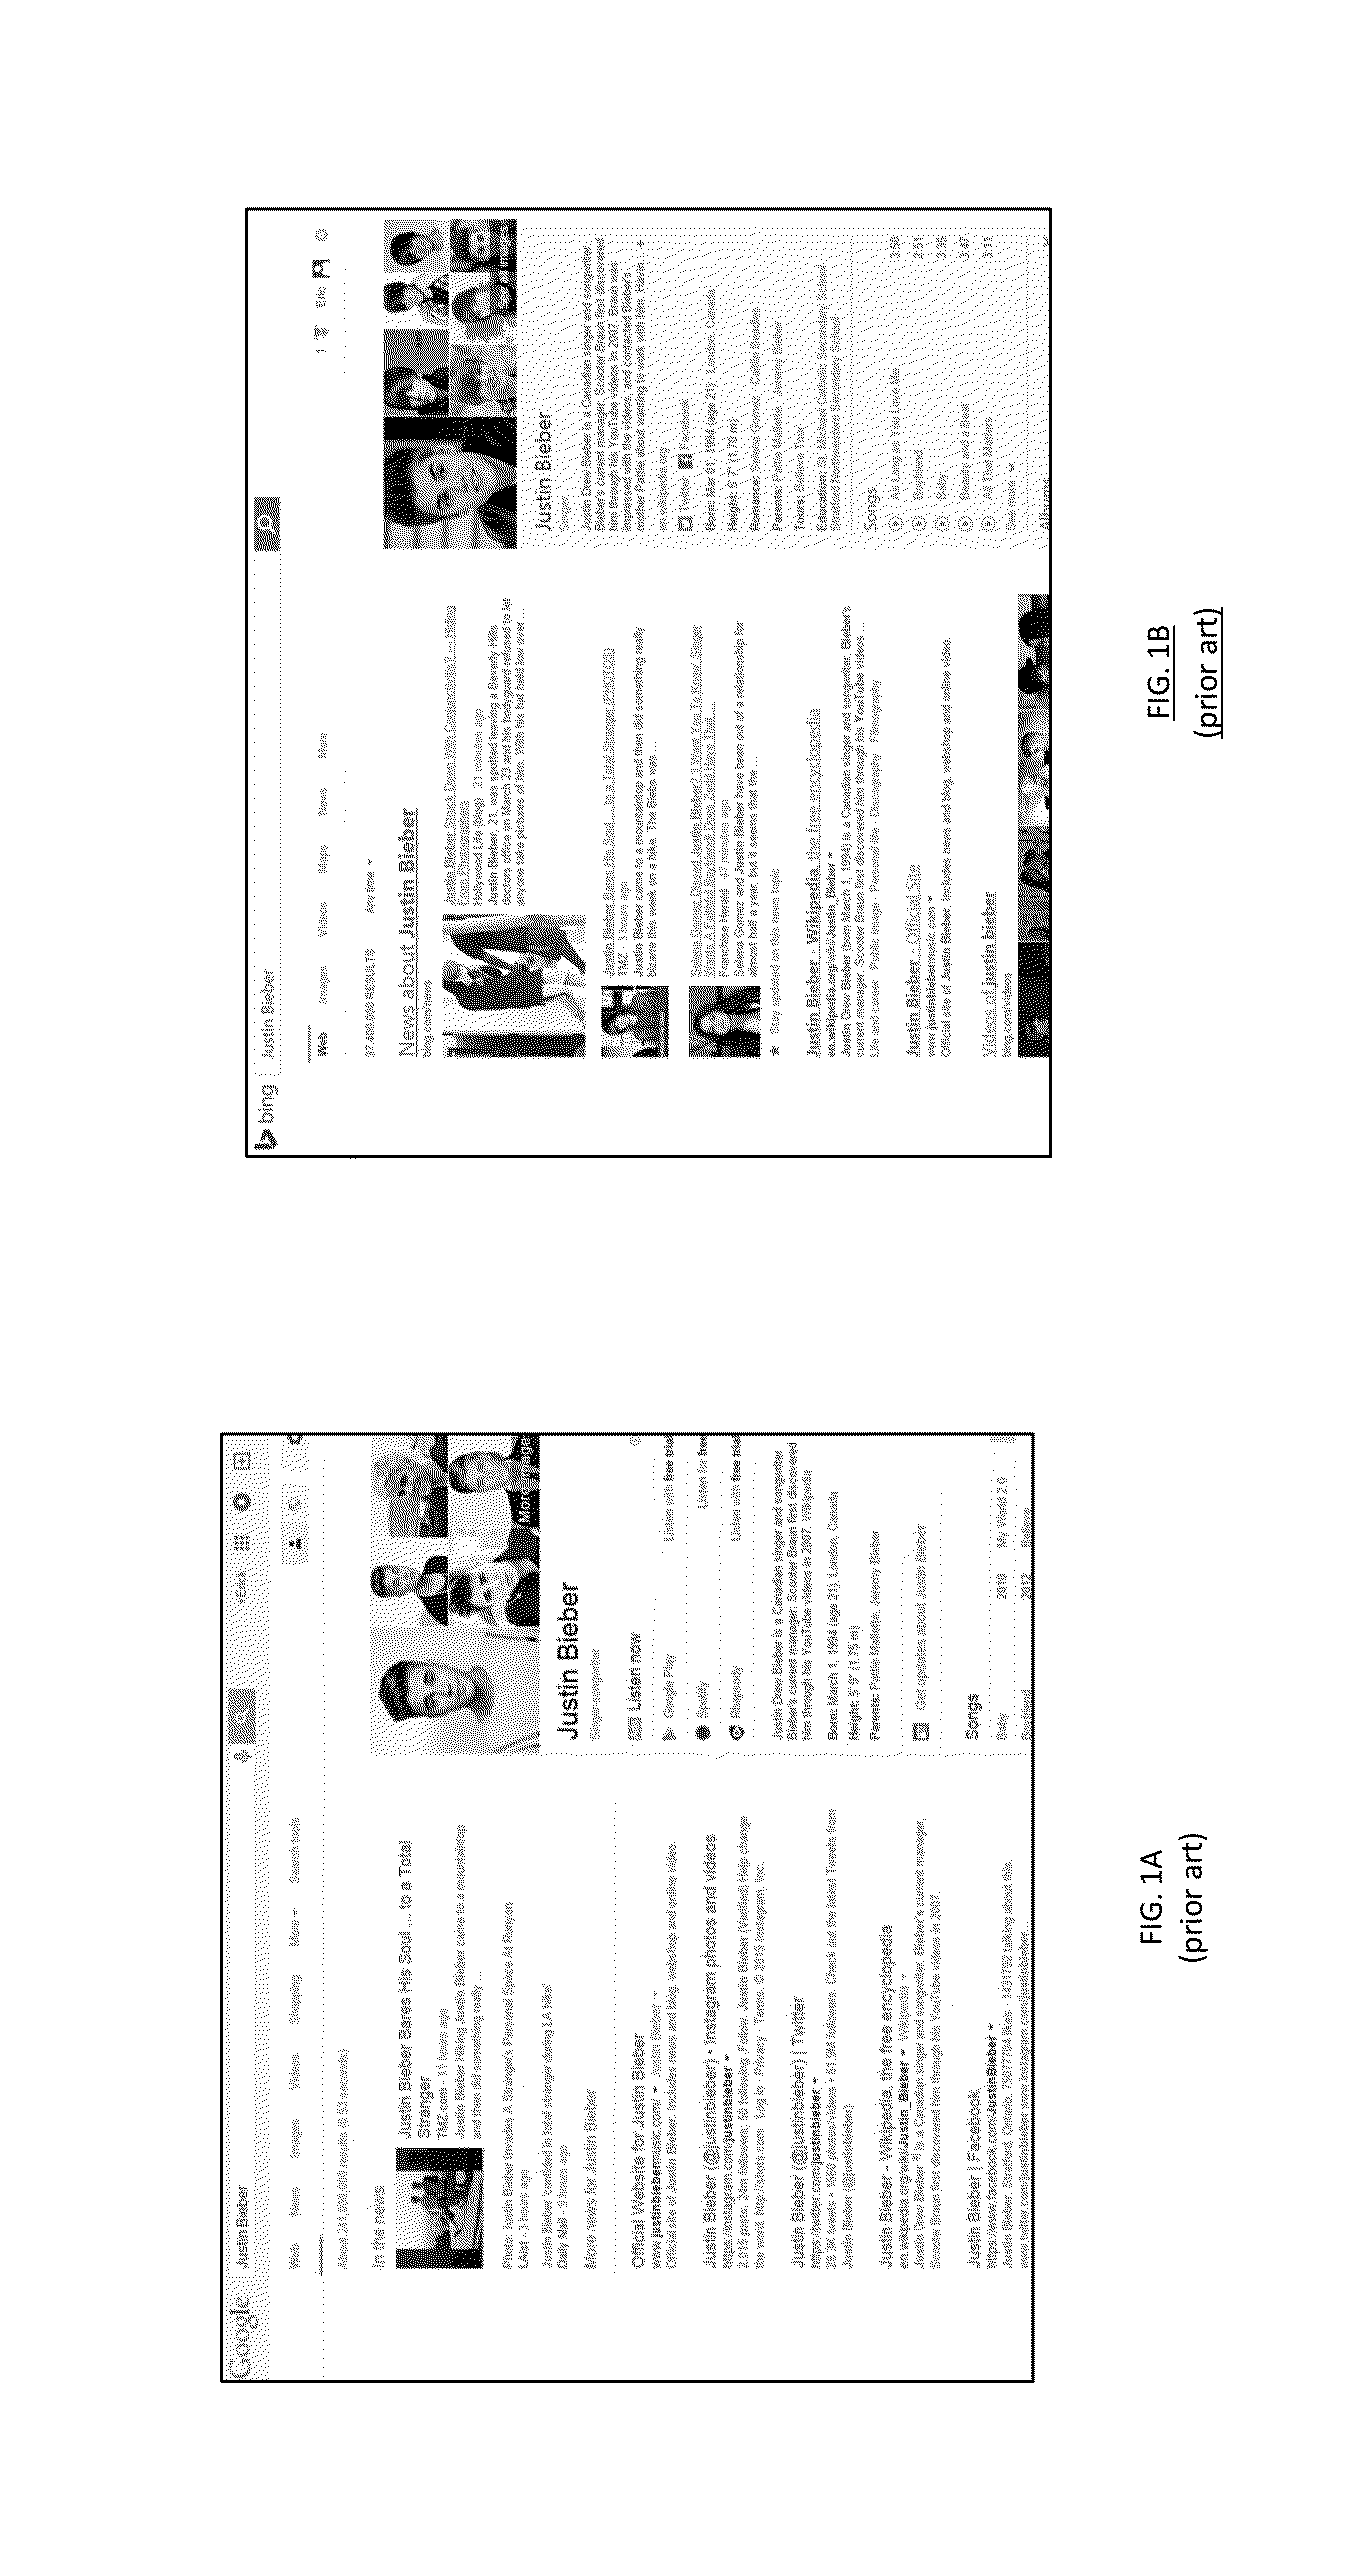 Method and system for conducting an opinion search engine and a display thereof